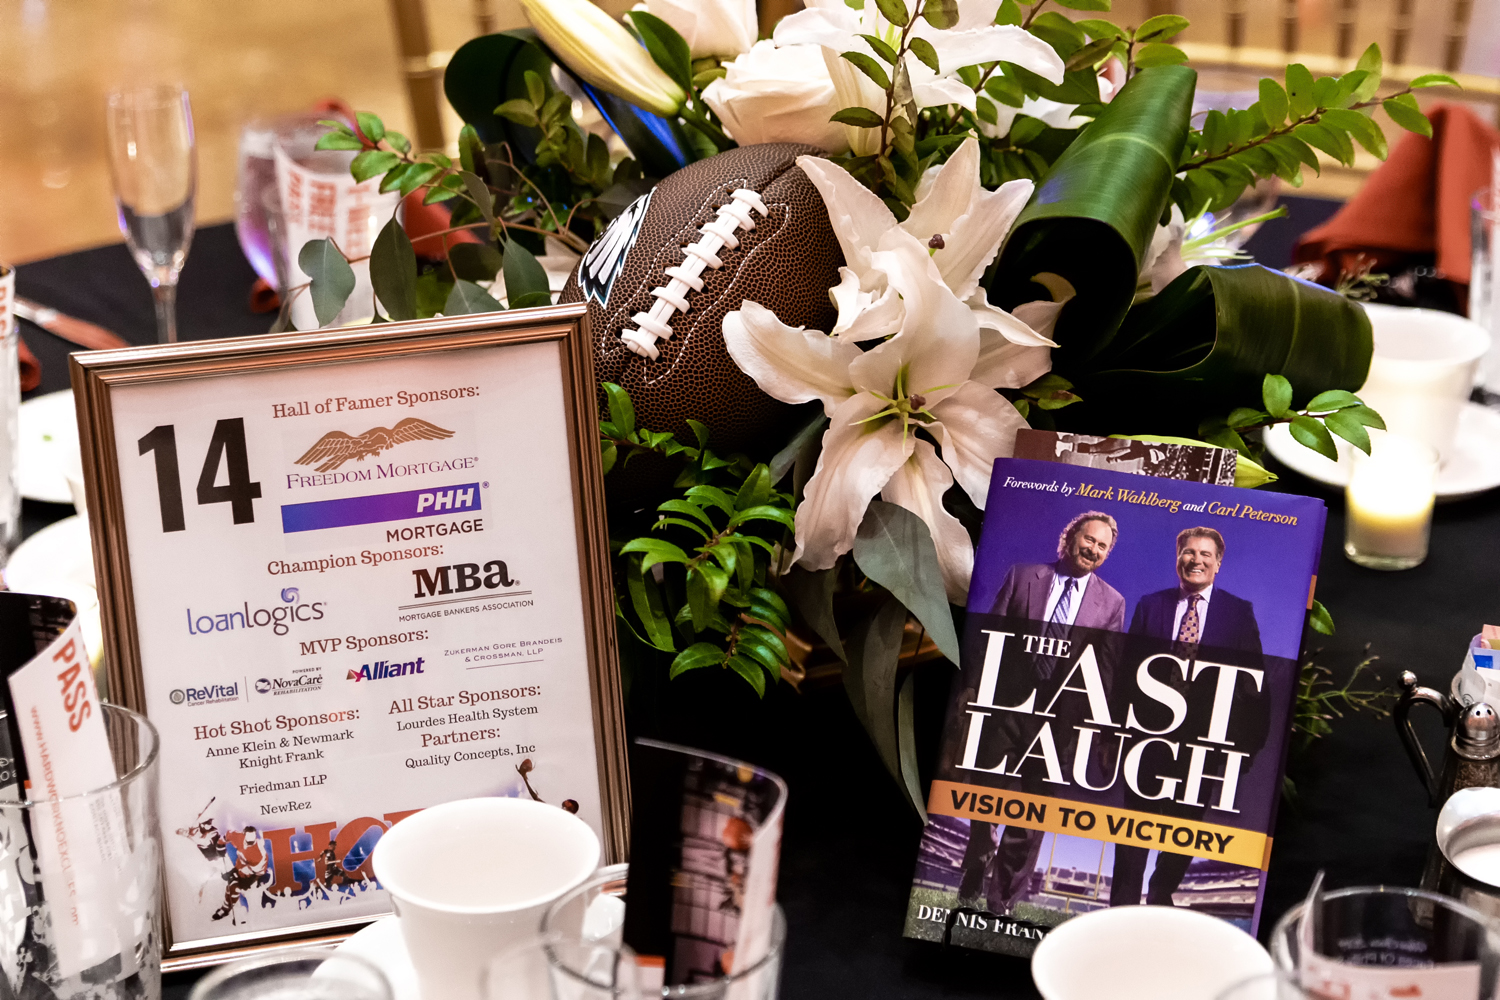 LoanLogics recently served as a Champion Sponsor of the American Cancer Society’s (ACS) South Jersey Hope Gala at The Merion in Cinnaminson, N.J., 